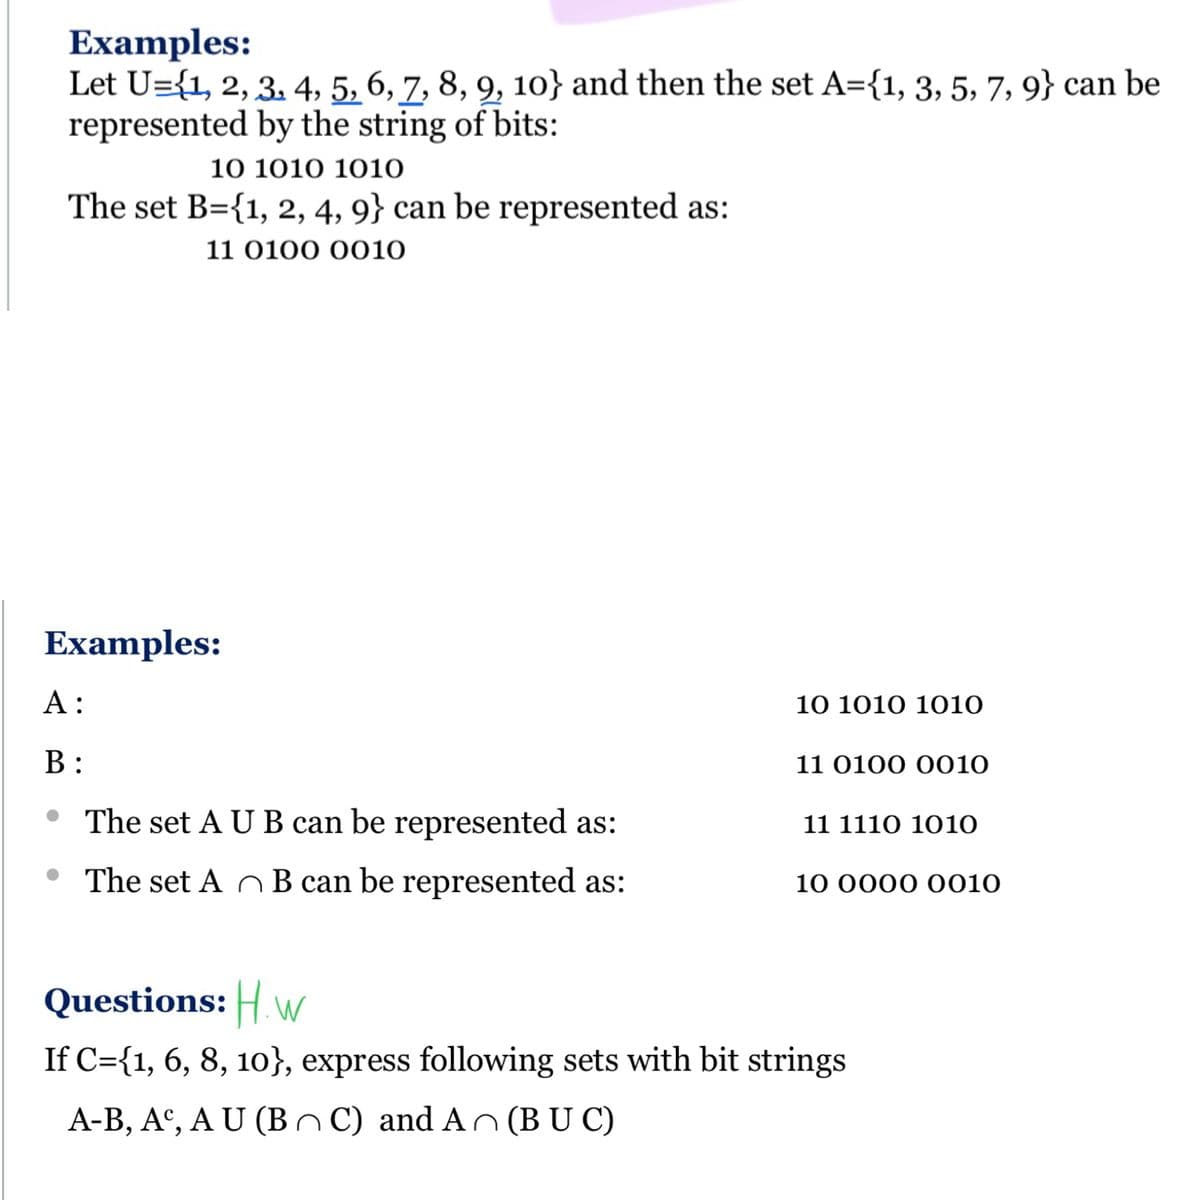 Examples:
Let U={1, 2, 3. 4, 5, 6, 7, 8, 9, 10} and then the set A={1, 3, 5, 7, 9} can be
represented by the string of bits:
10 101Ο 1010
The set B={1, 2, 4, 9} can be represented as:
11 0100 0010
Examples:
А:
10 1010 1010
В:
11 0100 0010
The set A U B can be represented as:
11 1110 1010
• The set A O B can be represented as:
10 0000 0010
Questions: Hw
If C={1, 6, 8, 10}, express following sets with bit strings
A-B, A°, A U (B C) and An(B U C)
